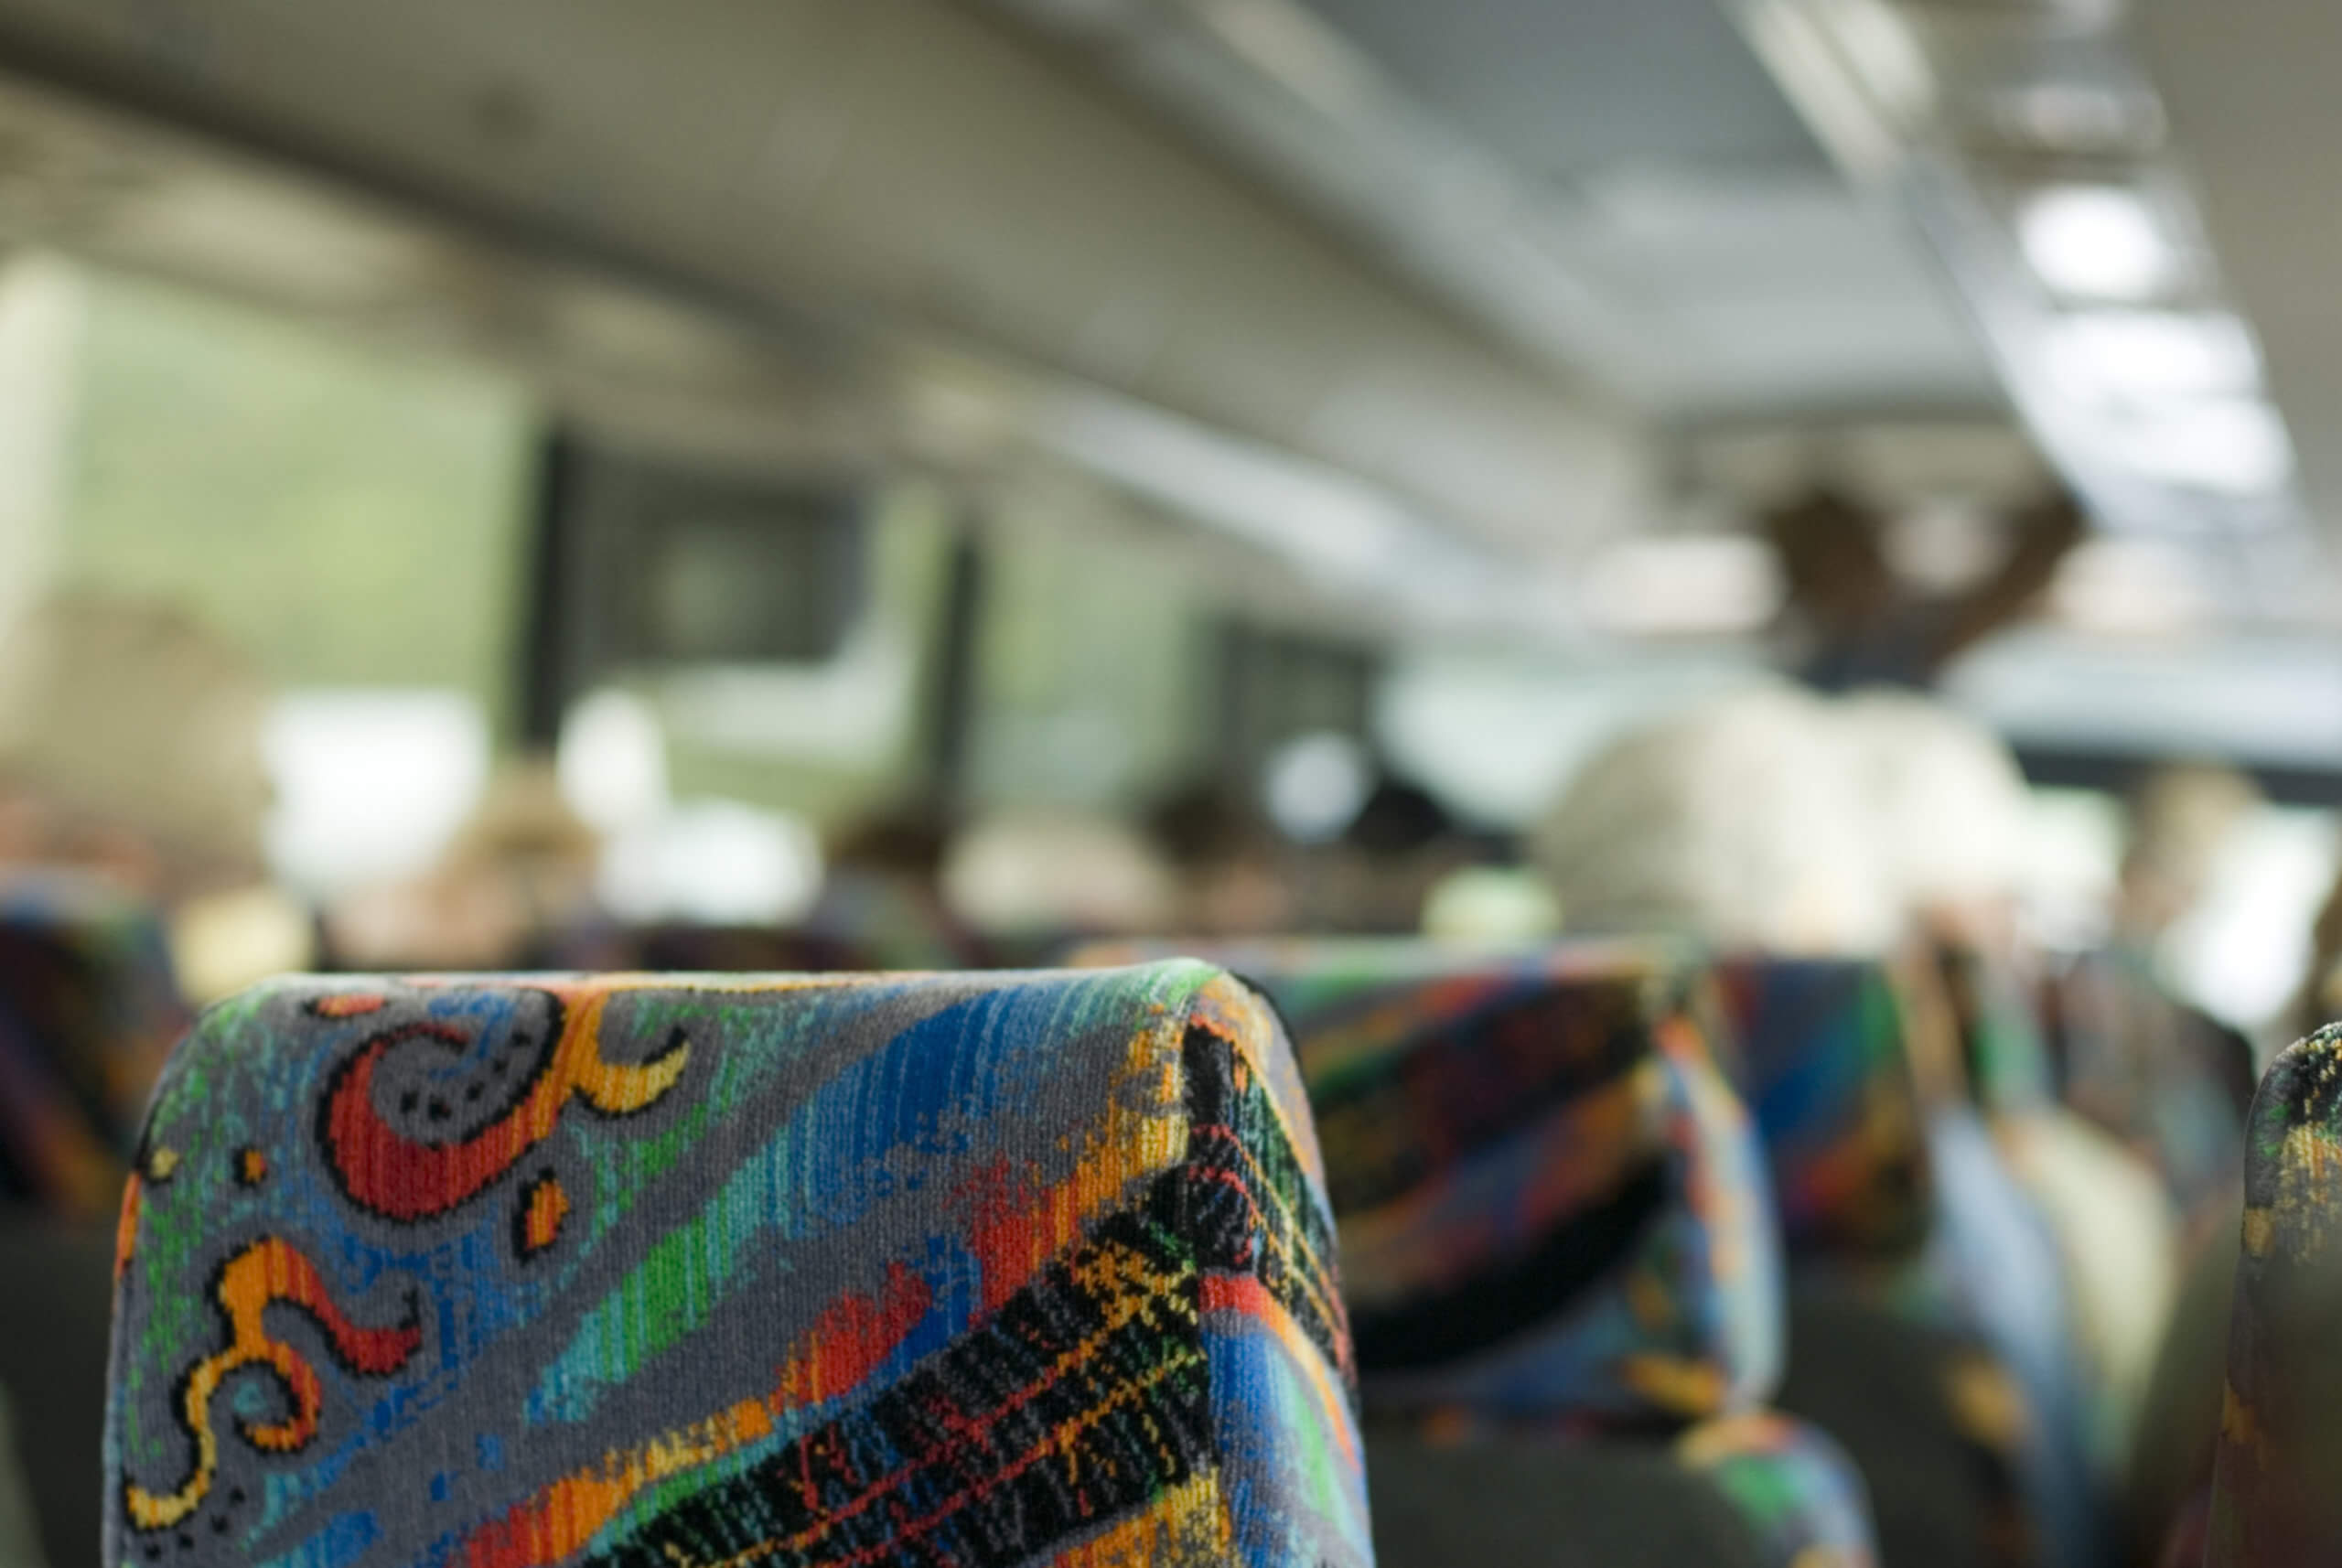 Blurred background showing the interior of a tour coach bus with focus to the floral fabric back of a passenger seat in the foreground